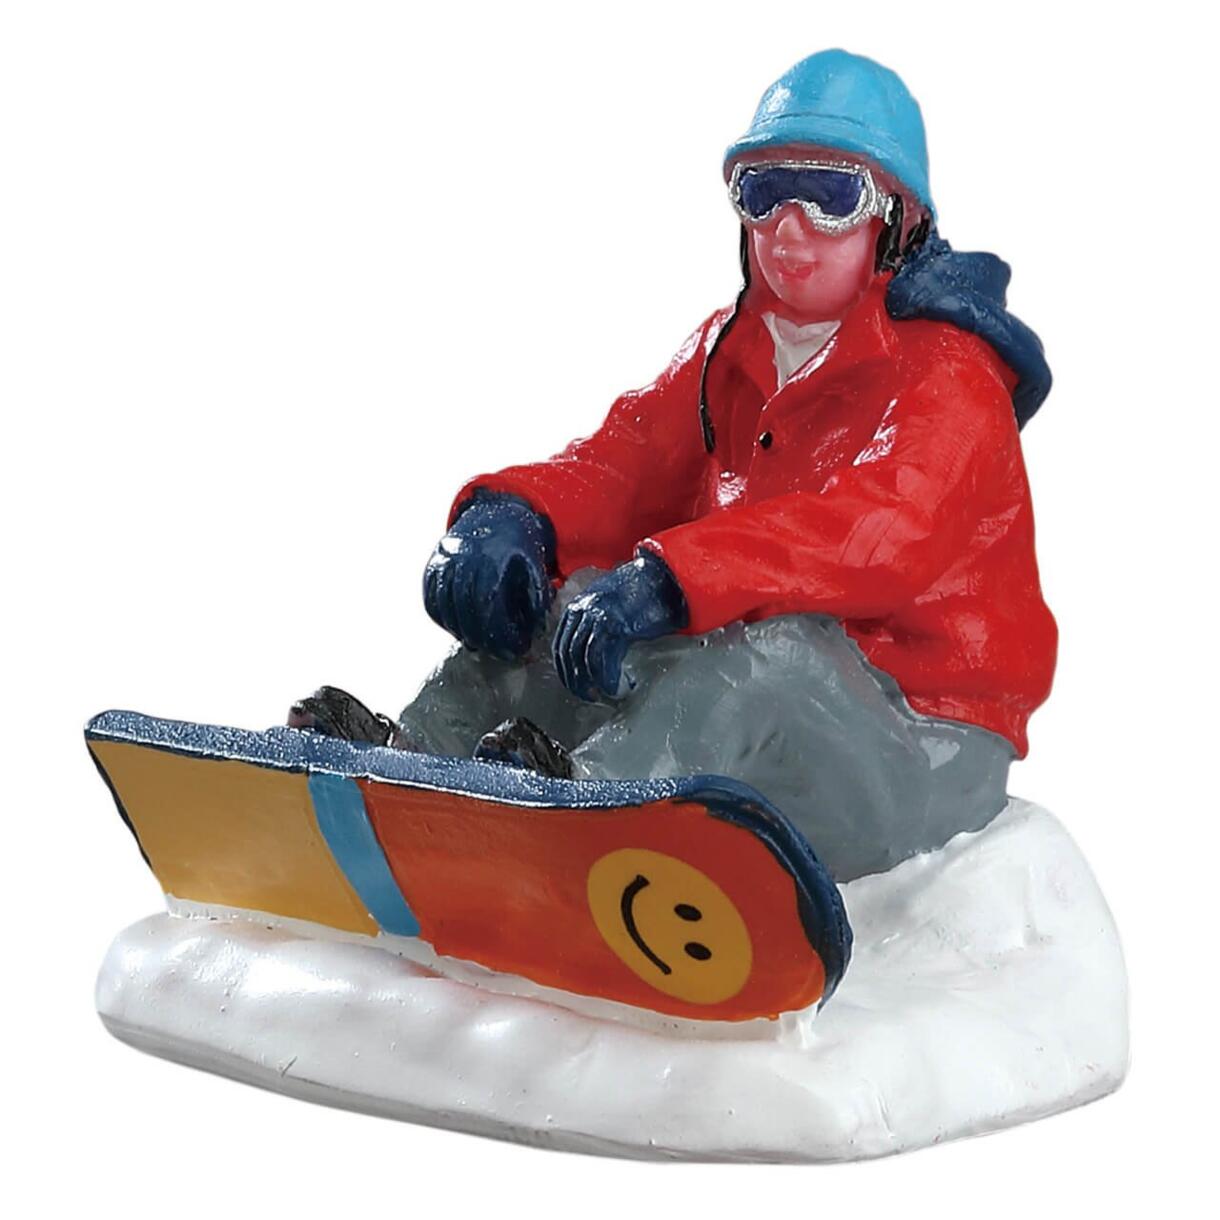 Personnage Lemax Snowboarder